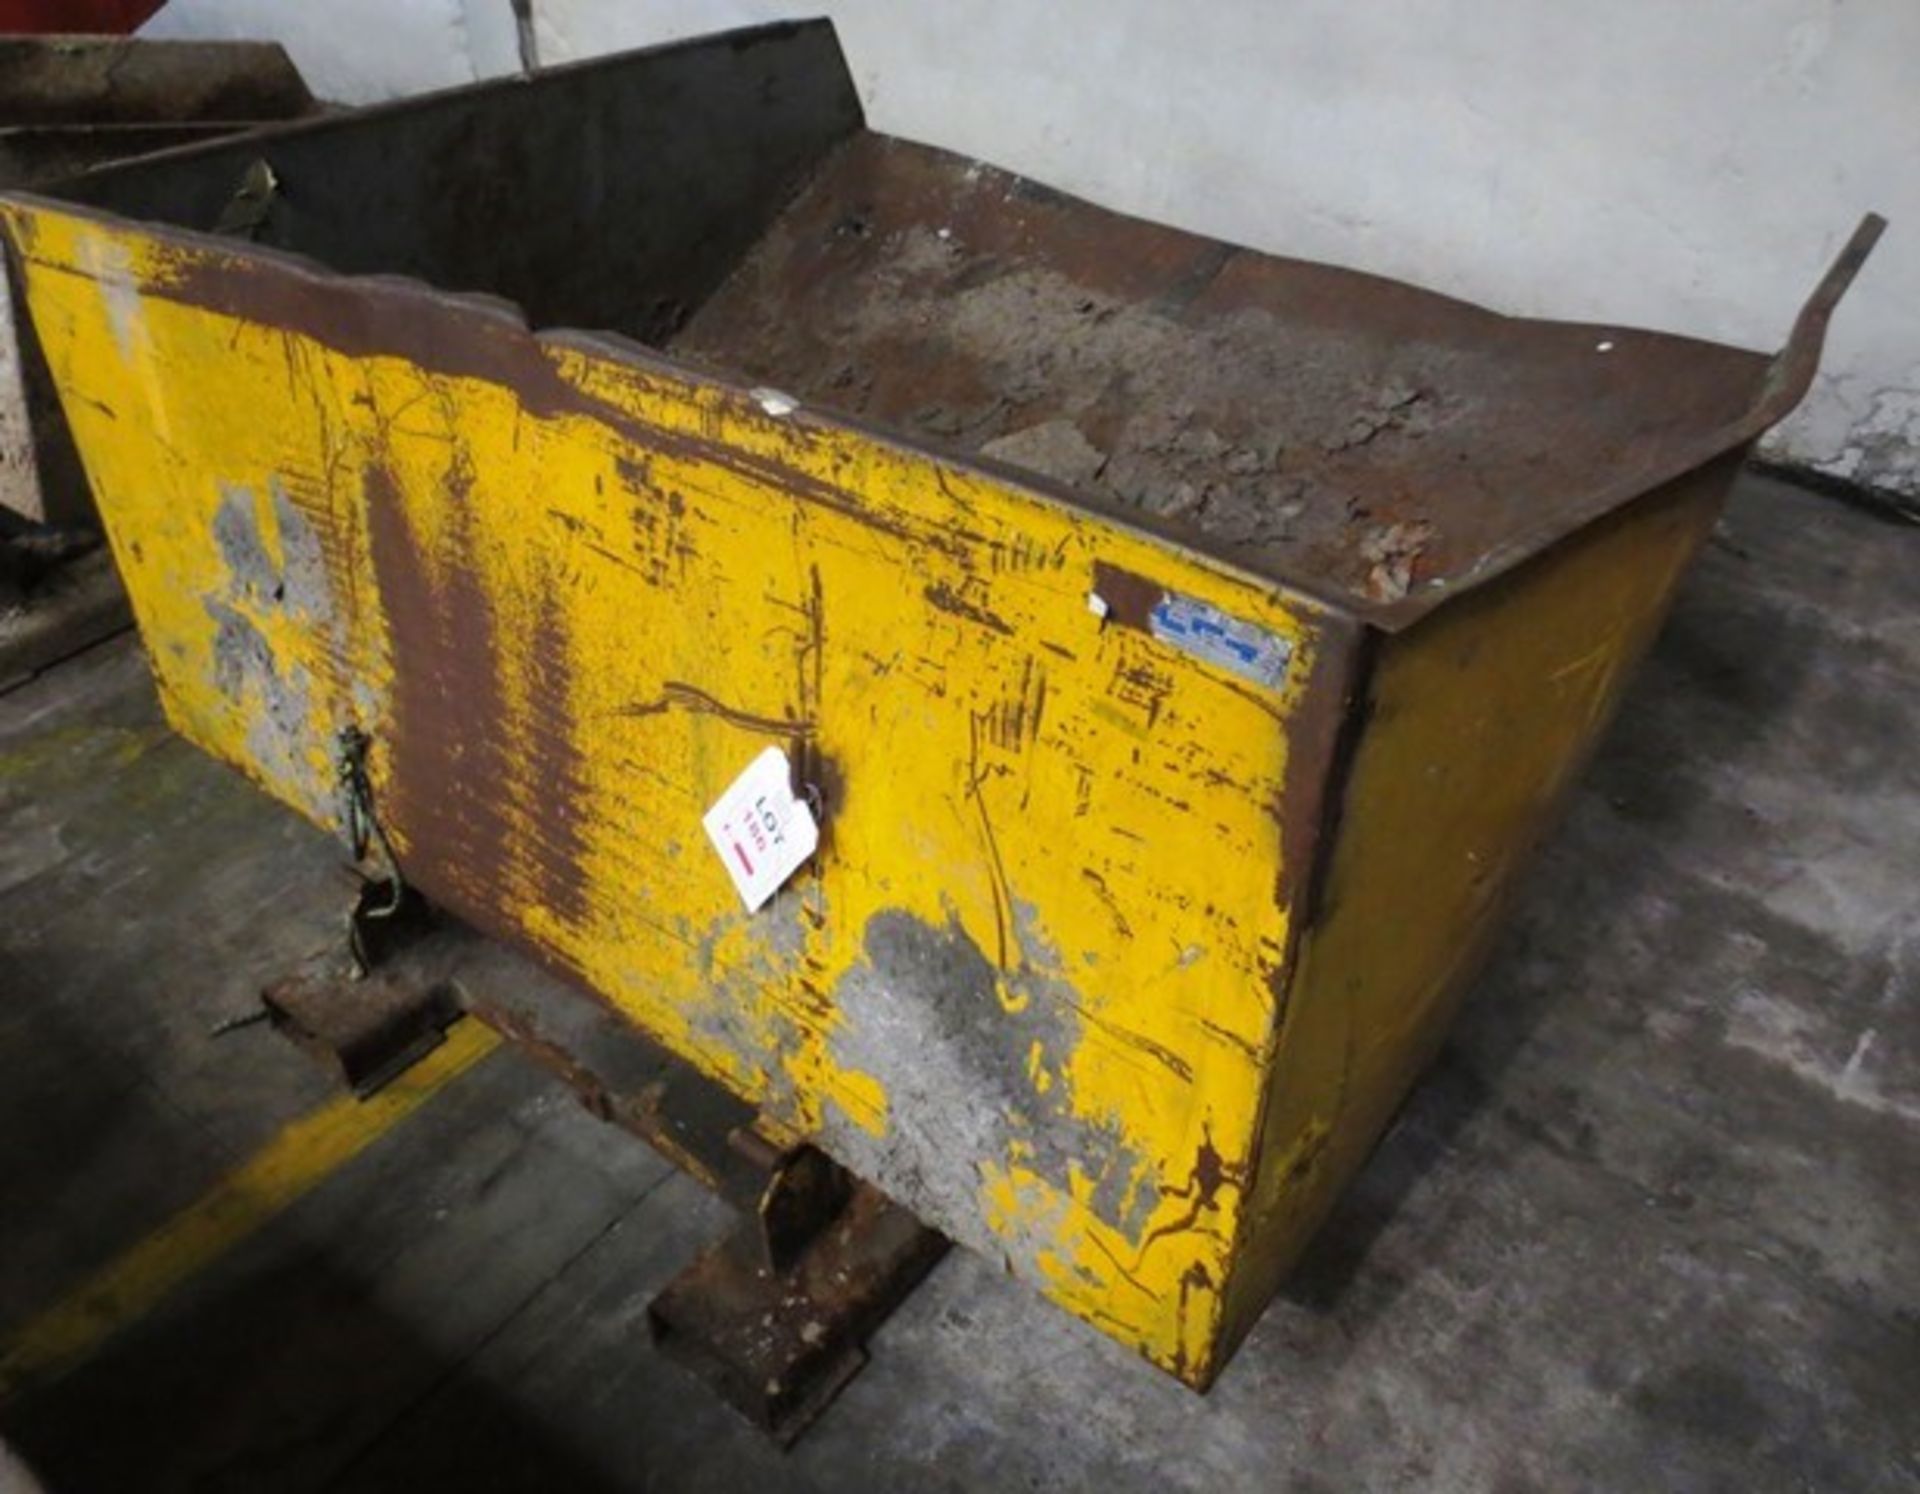 Contact RFS 160L fork lift mounting tipping skip, s/n: unknown date: unknown, 1500kg capacity, Bin